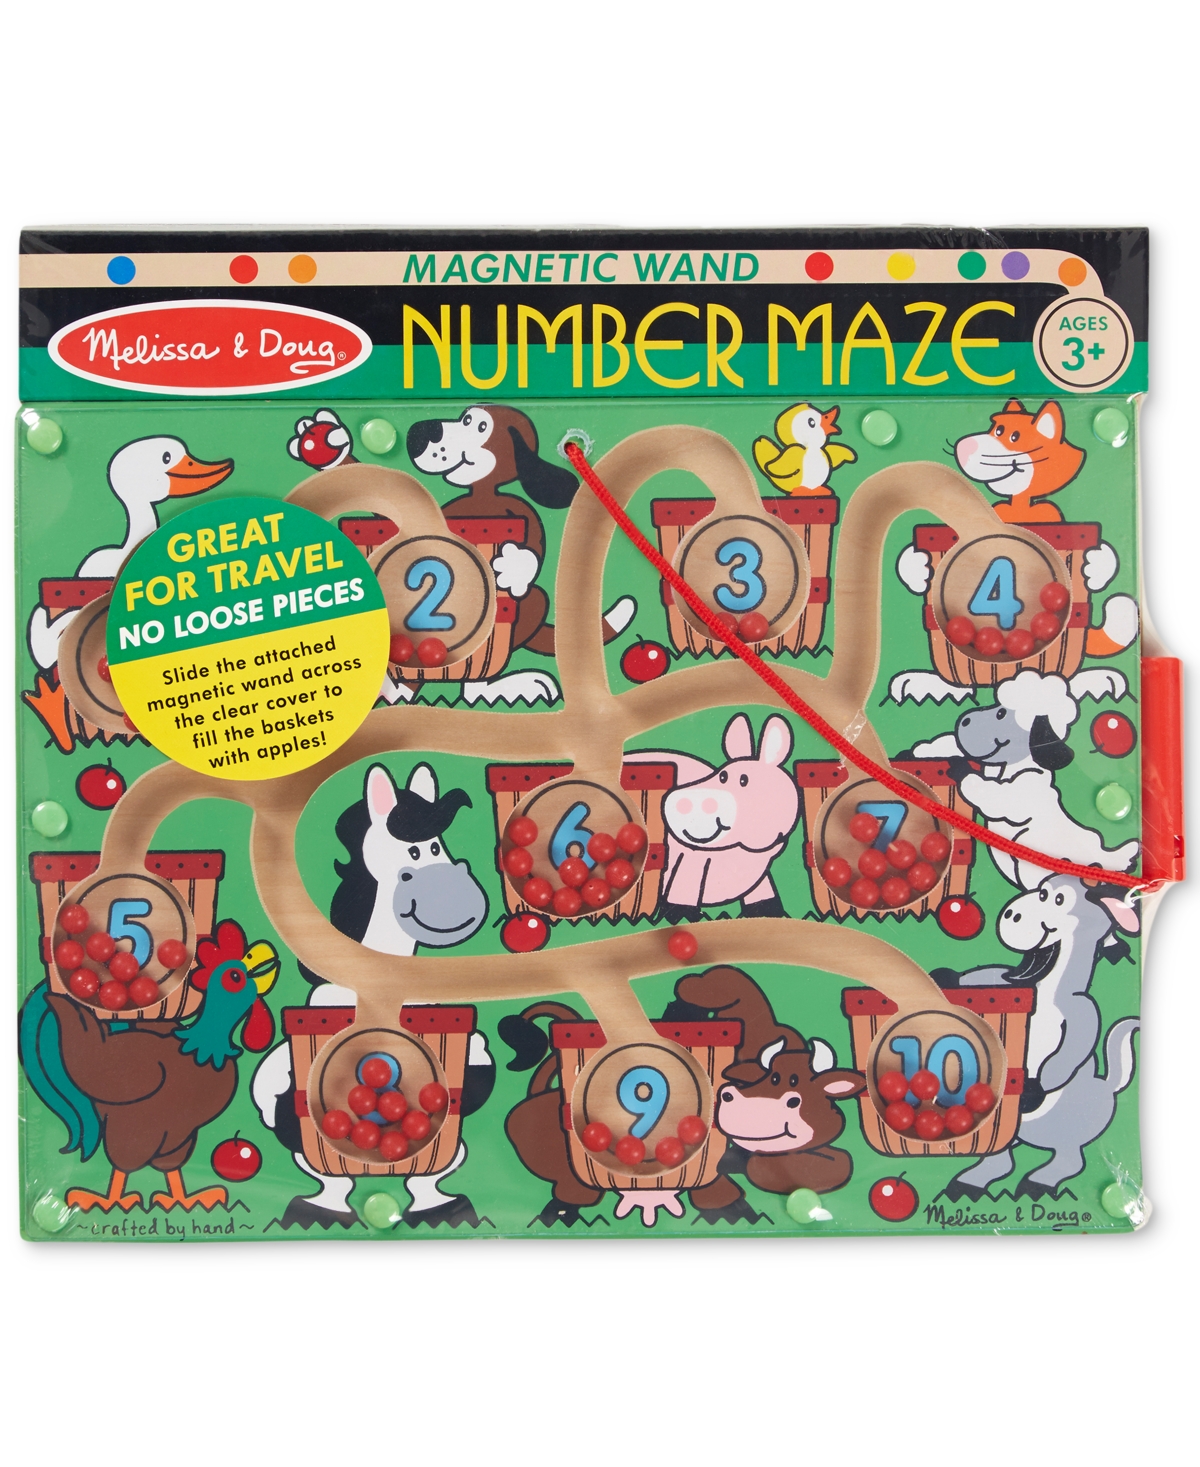 Melissa & Doug Kids'  Magnetic Wand Number Maze Wooden Puzzle Activity In Multi